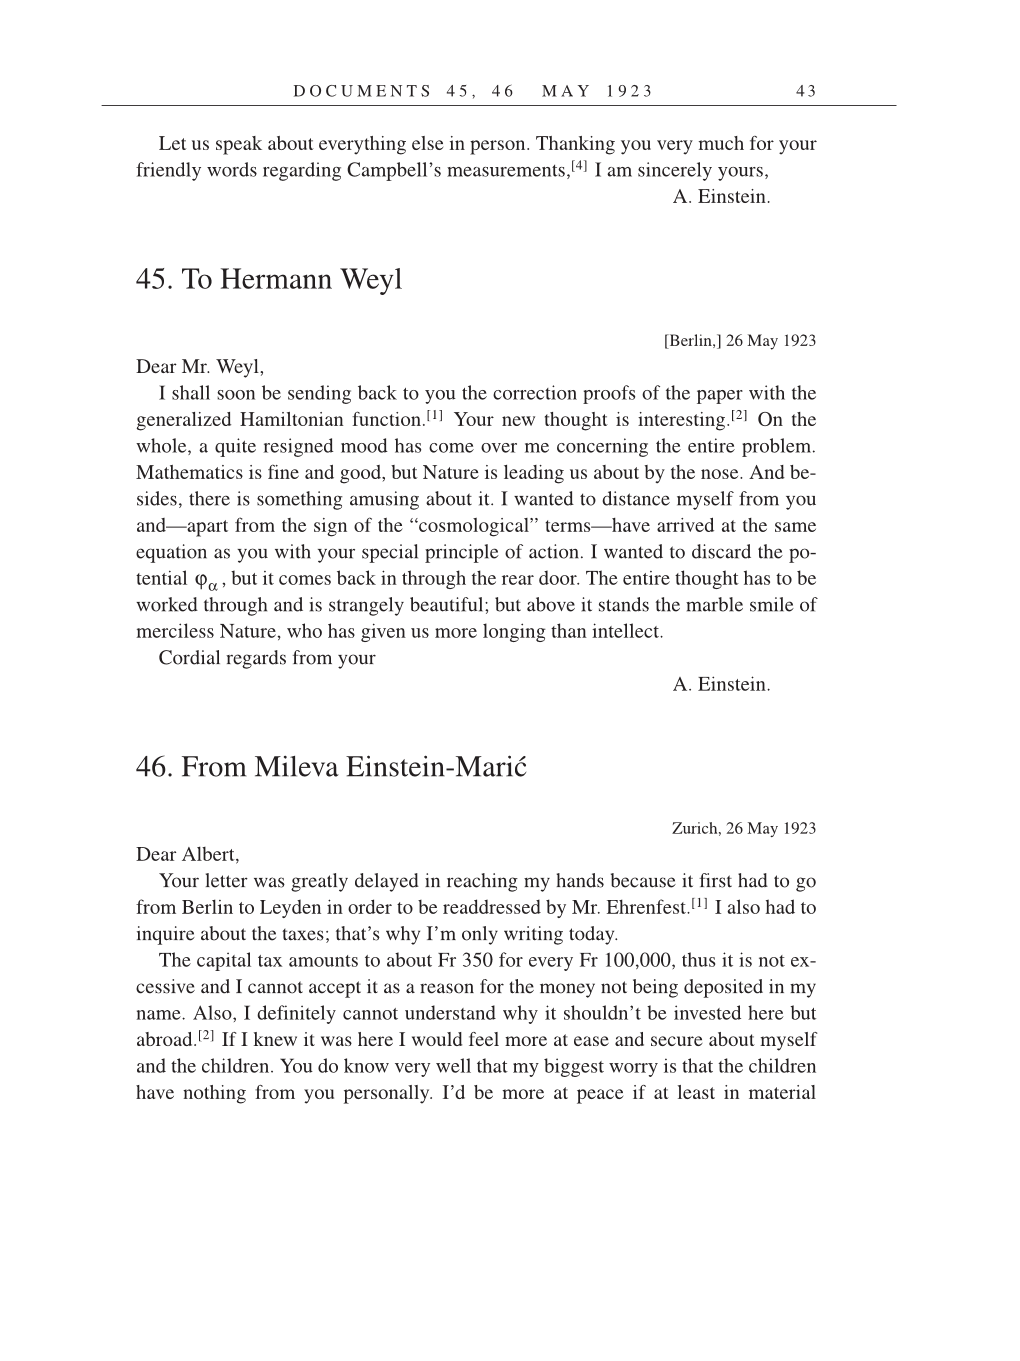 Volume 14: The Berlin Years: Writings & Correspondence, April 1923-May 1925 (English Translation Supplement) page 43